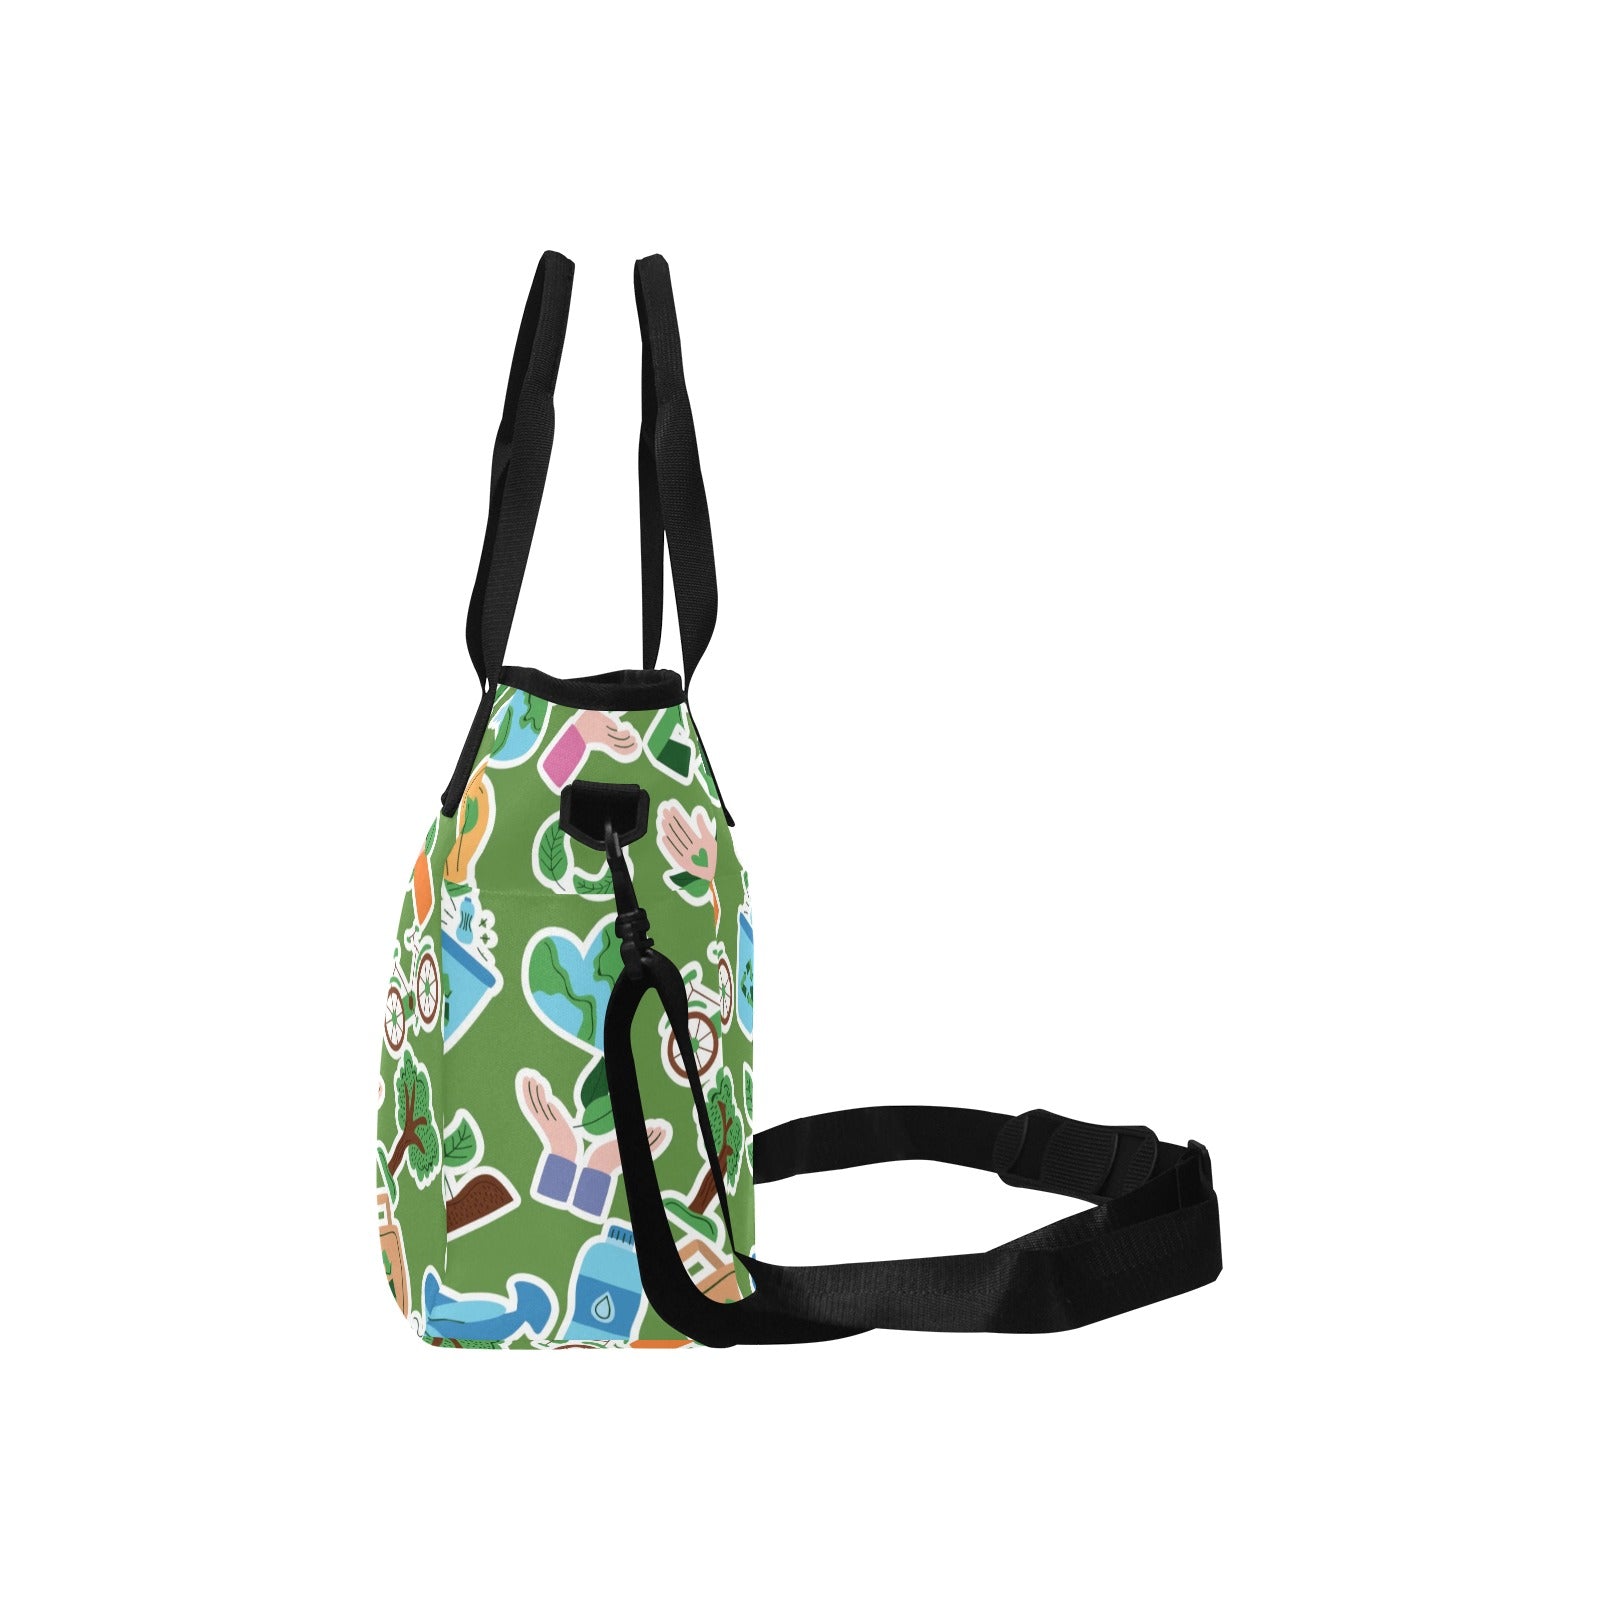 Earth Stickers - Tote Bag with Shoulder Strap Nylon Tote Bag